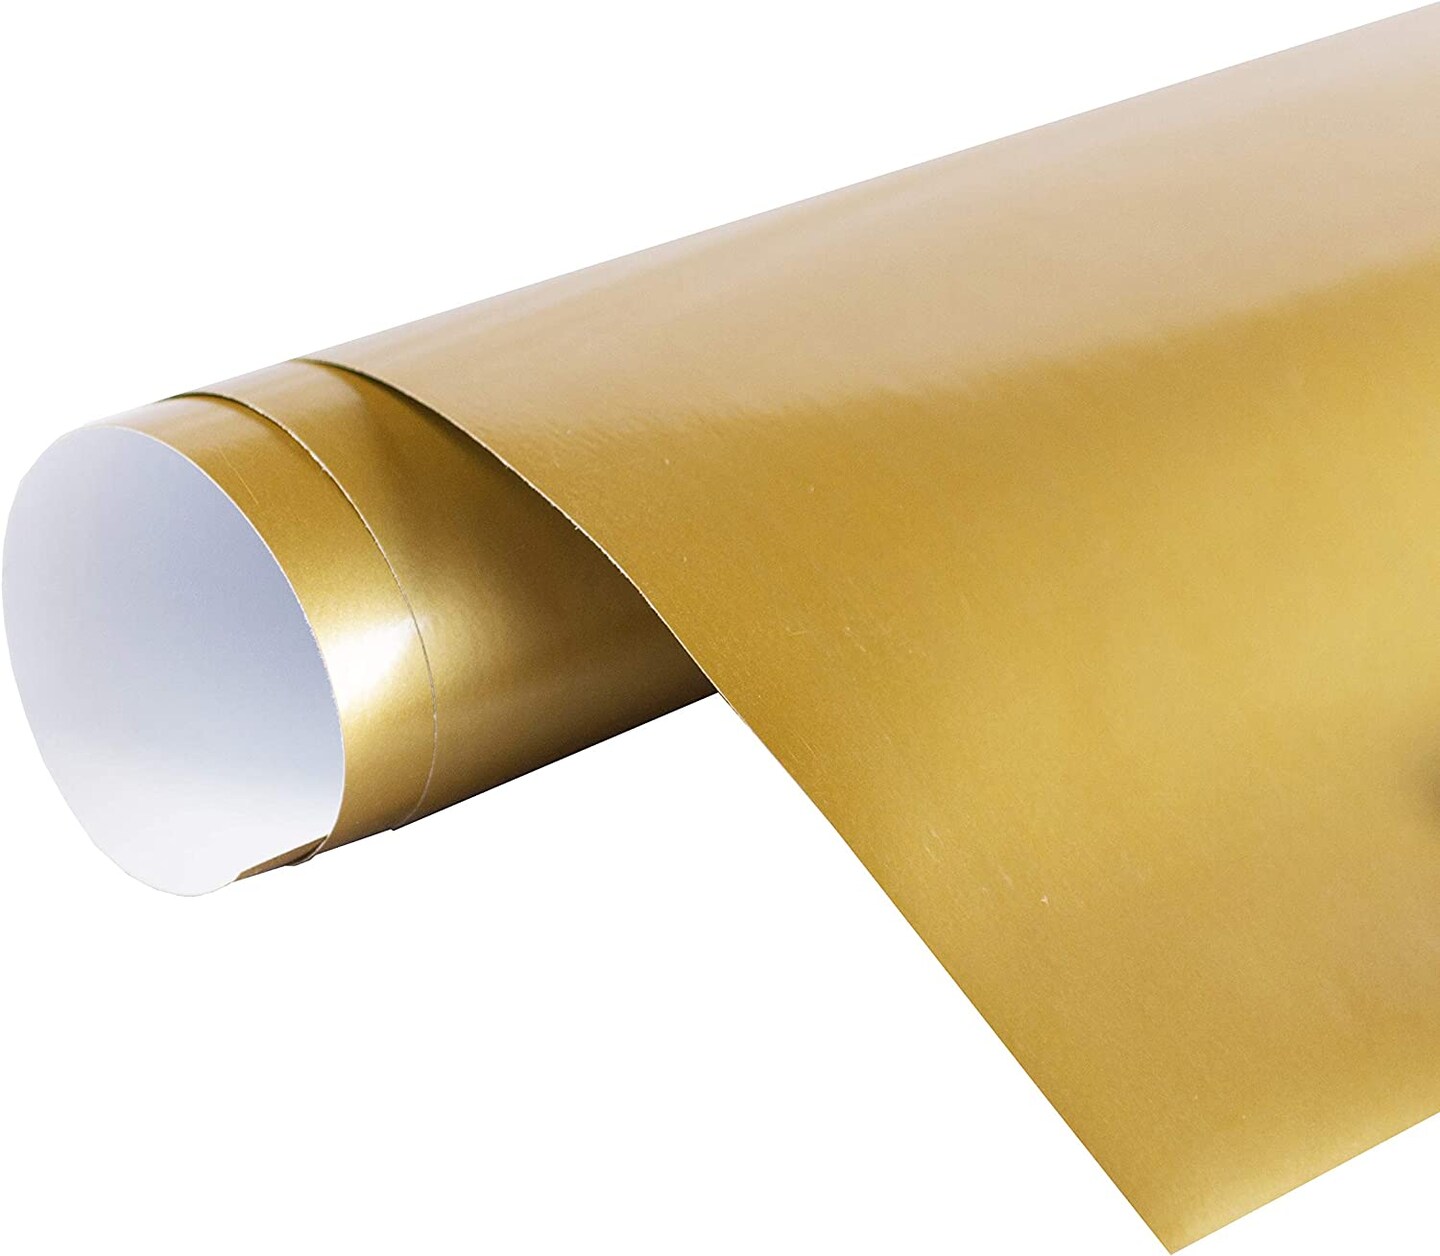 24 x 50 ft Roll of Glossy Gold Adhesive-Backed Vinyl for Signs,  Scrapbooking, Cricut, Silhouette Cameo, Craft, Die Cutters